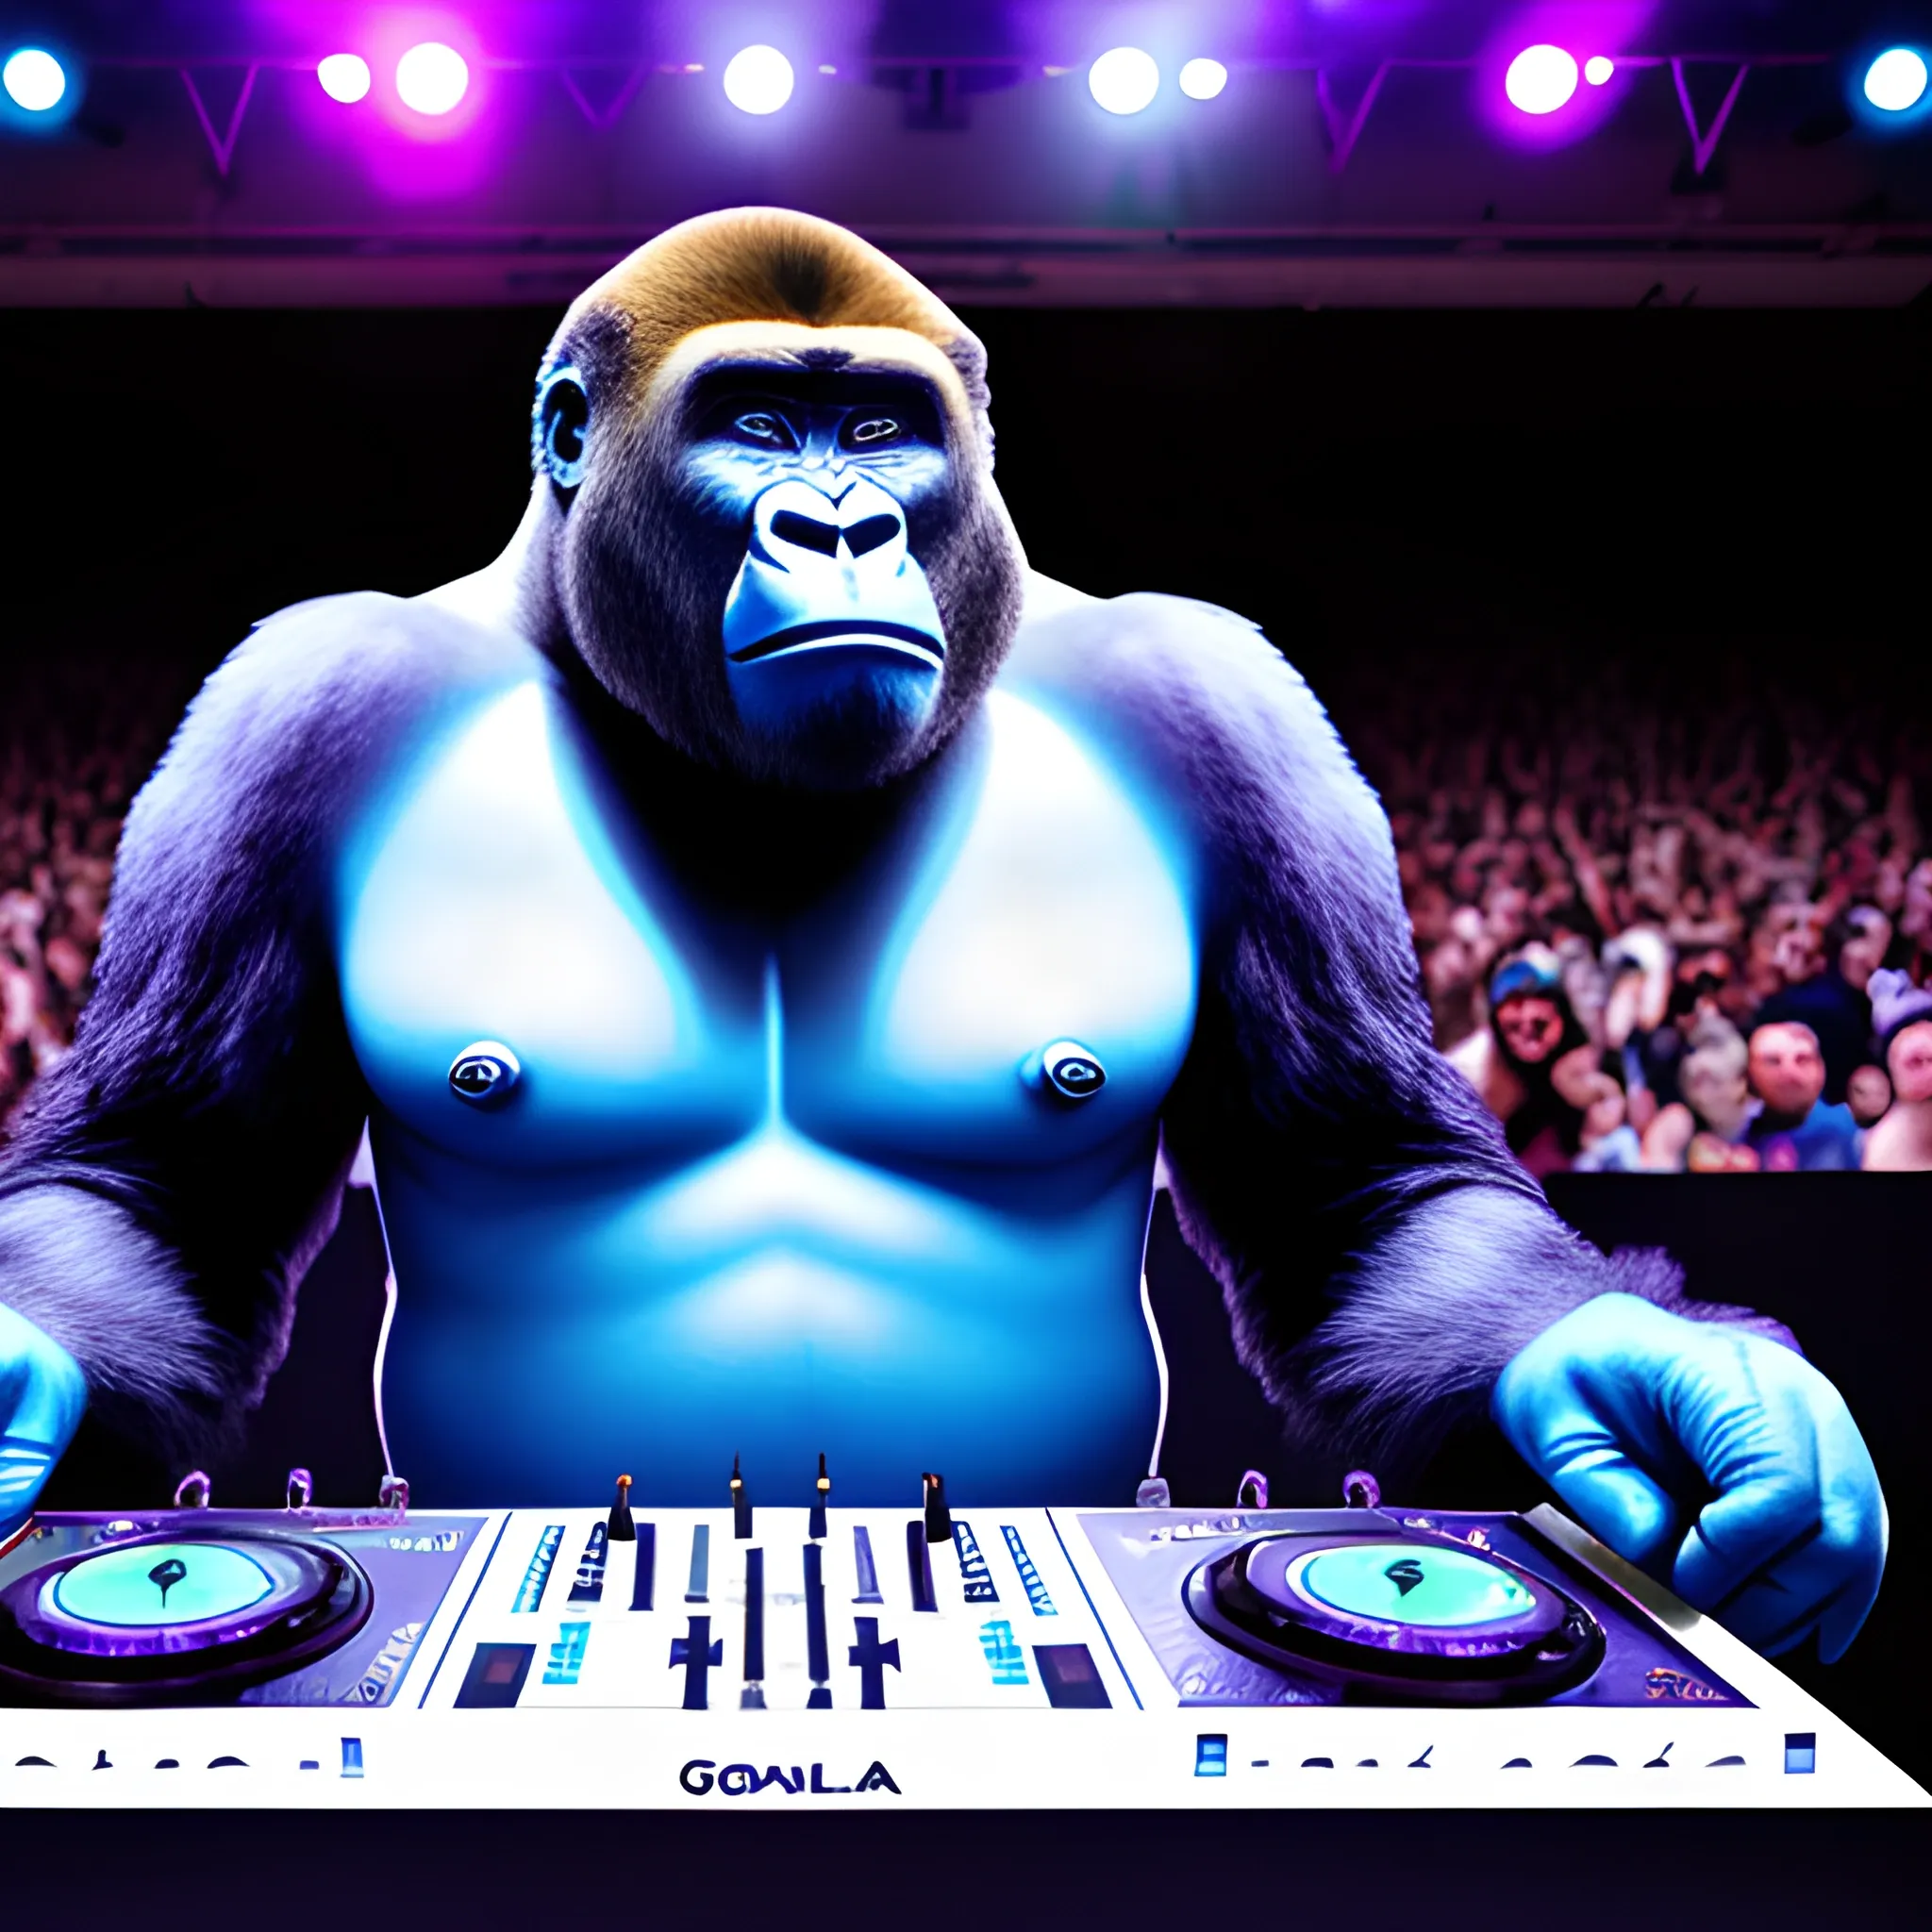 Gorilla dj speaking into the microphonegiving a packed show, runway full of people, set of speakers playing, blue lights, Cartoon